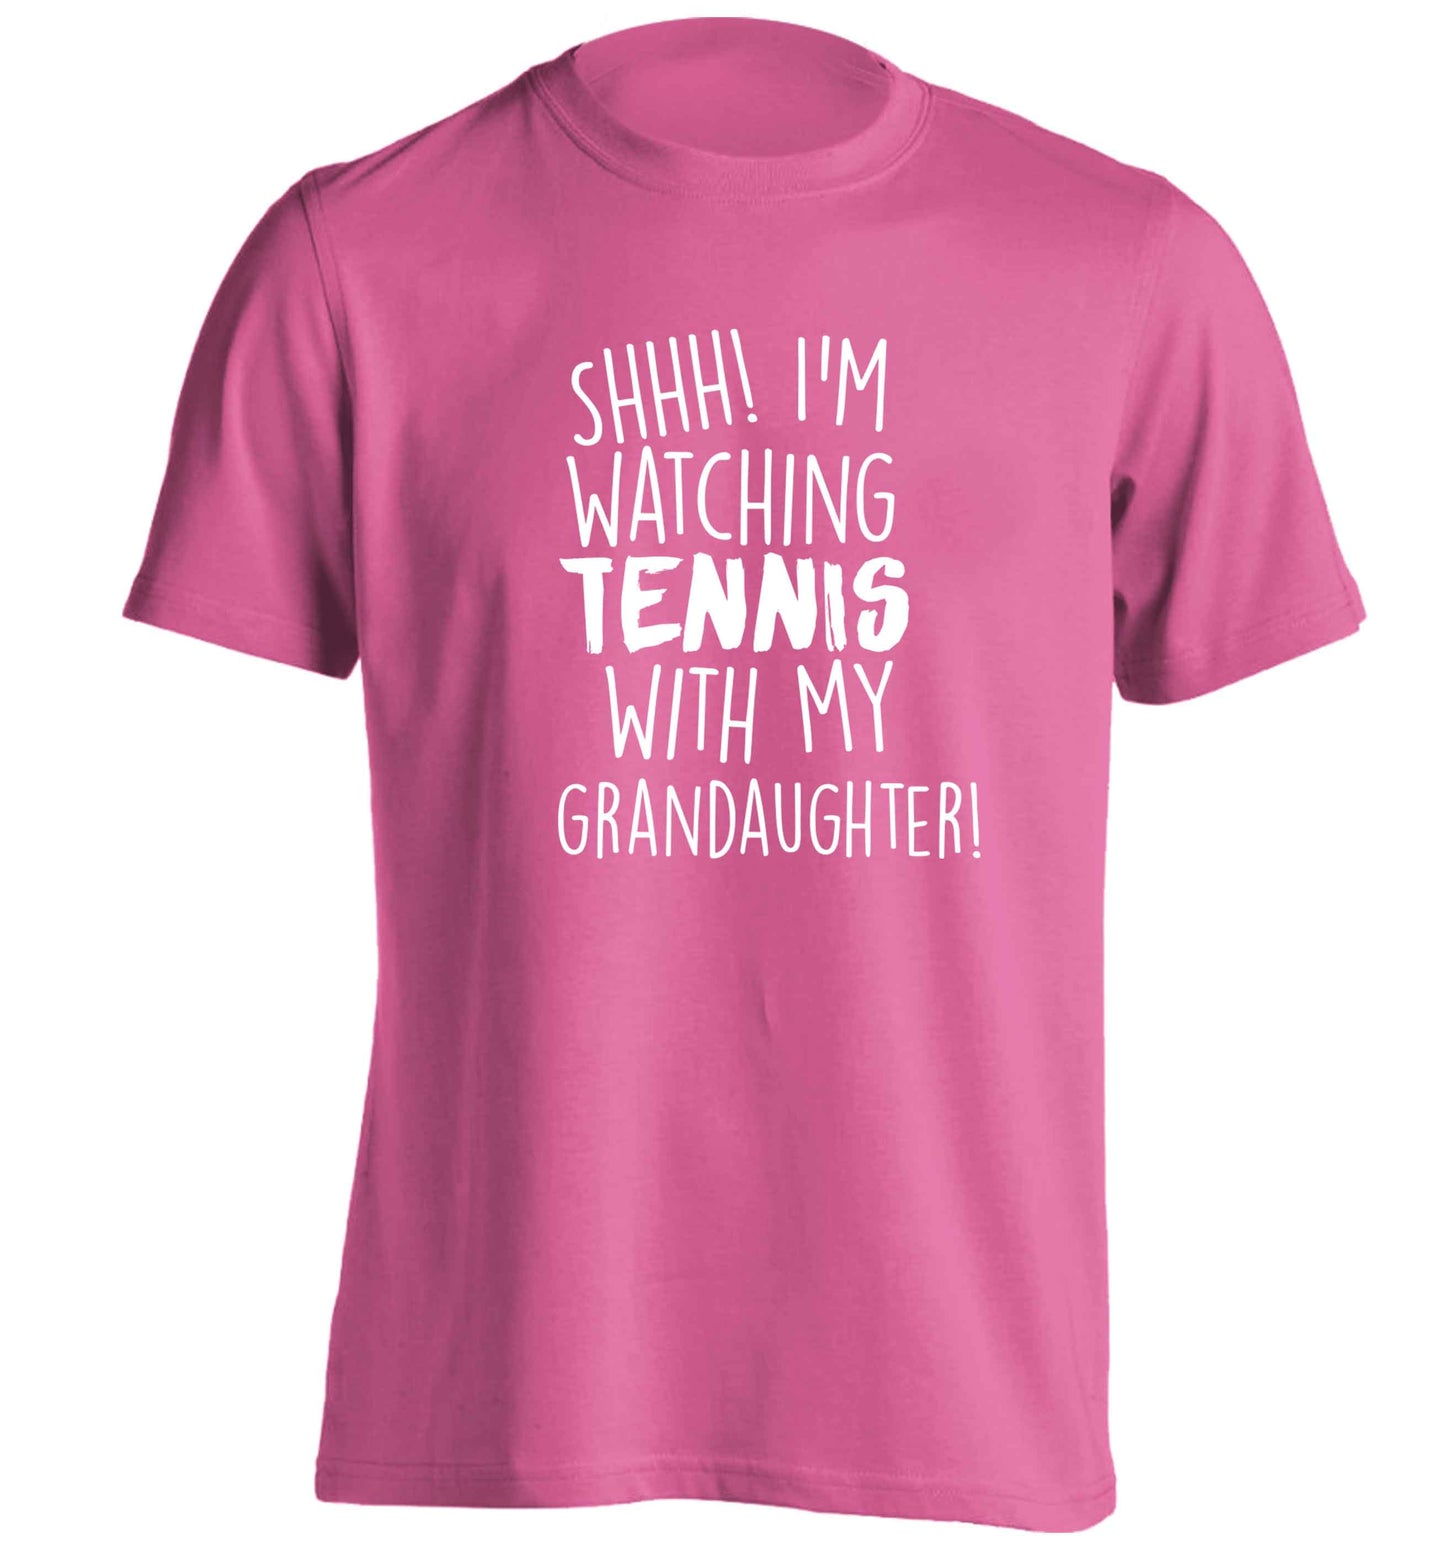 Shh! I'm watching tennis with my granddaughter! adults unisex pink Tshirt 2XL